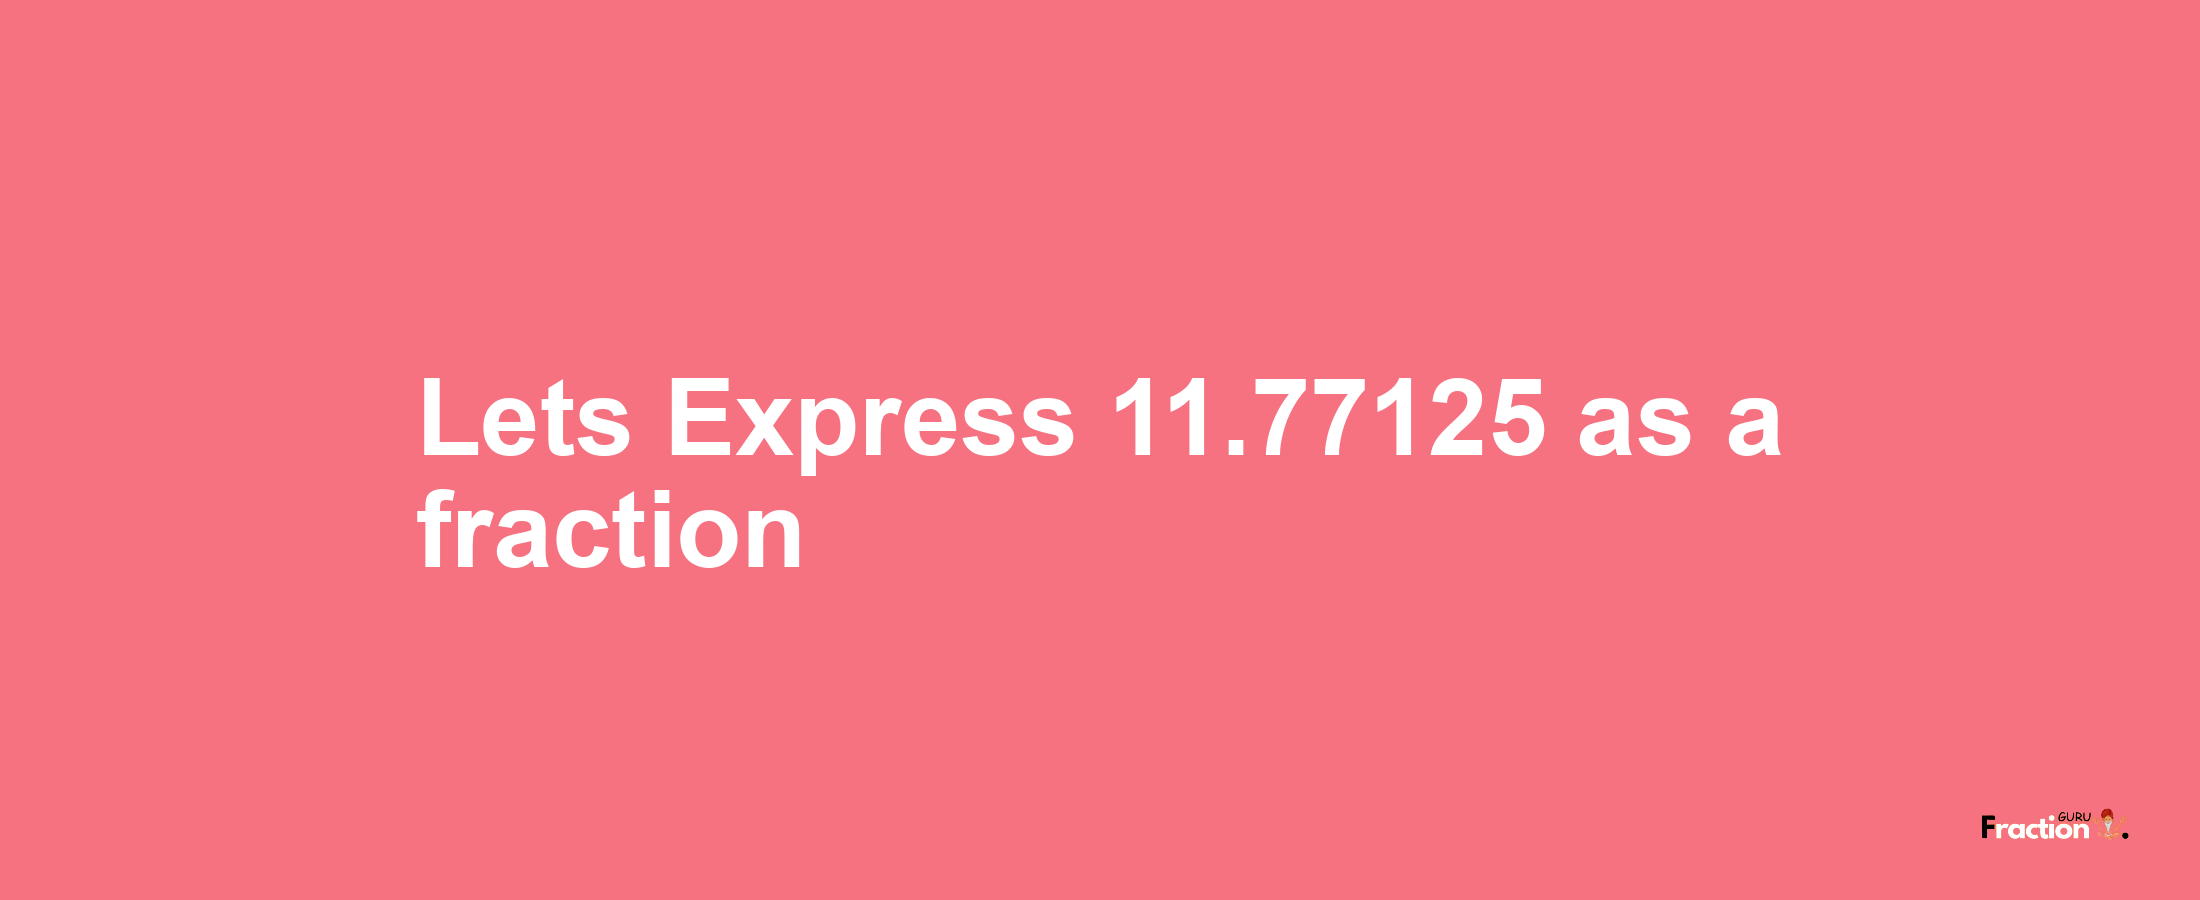 Lets Express 11.77125 as afraction